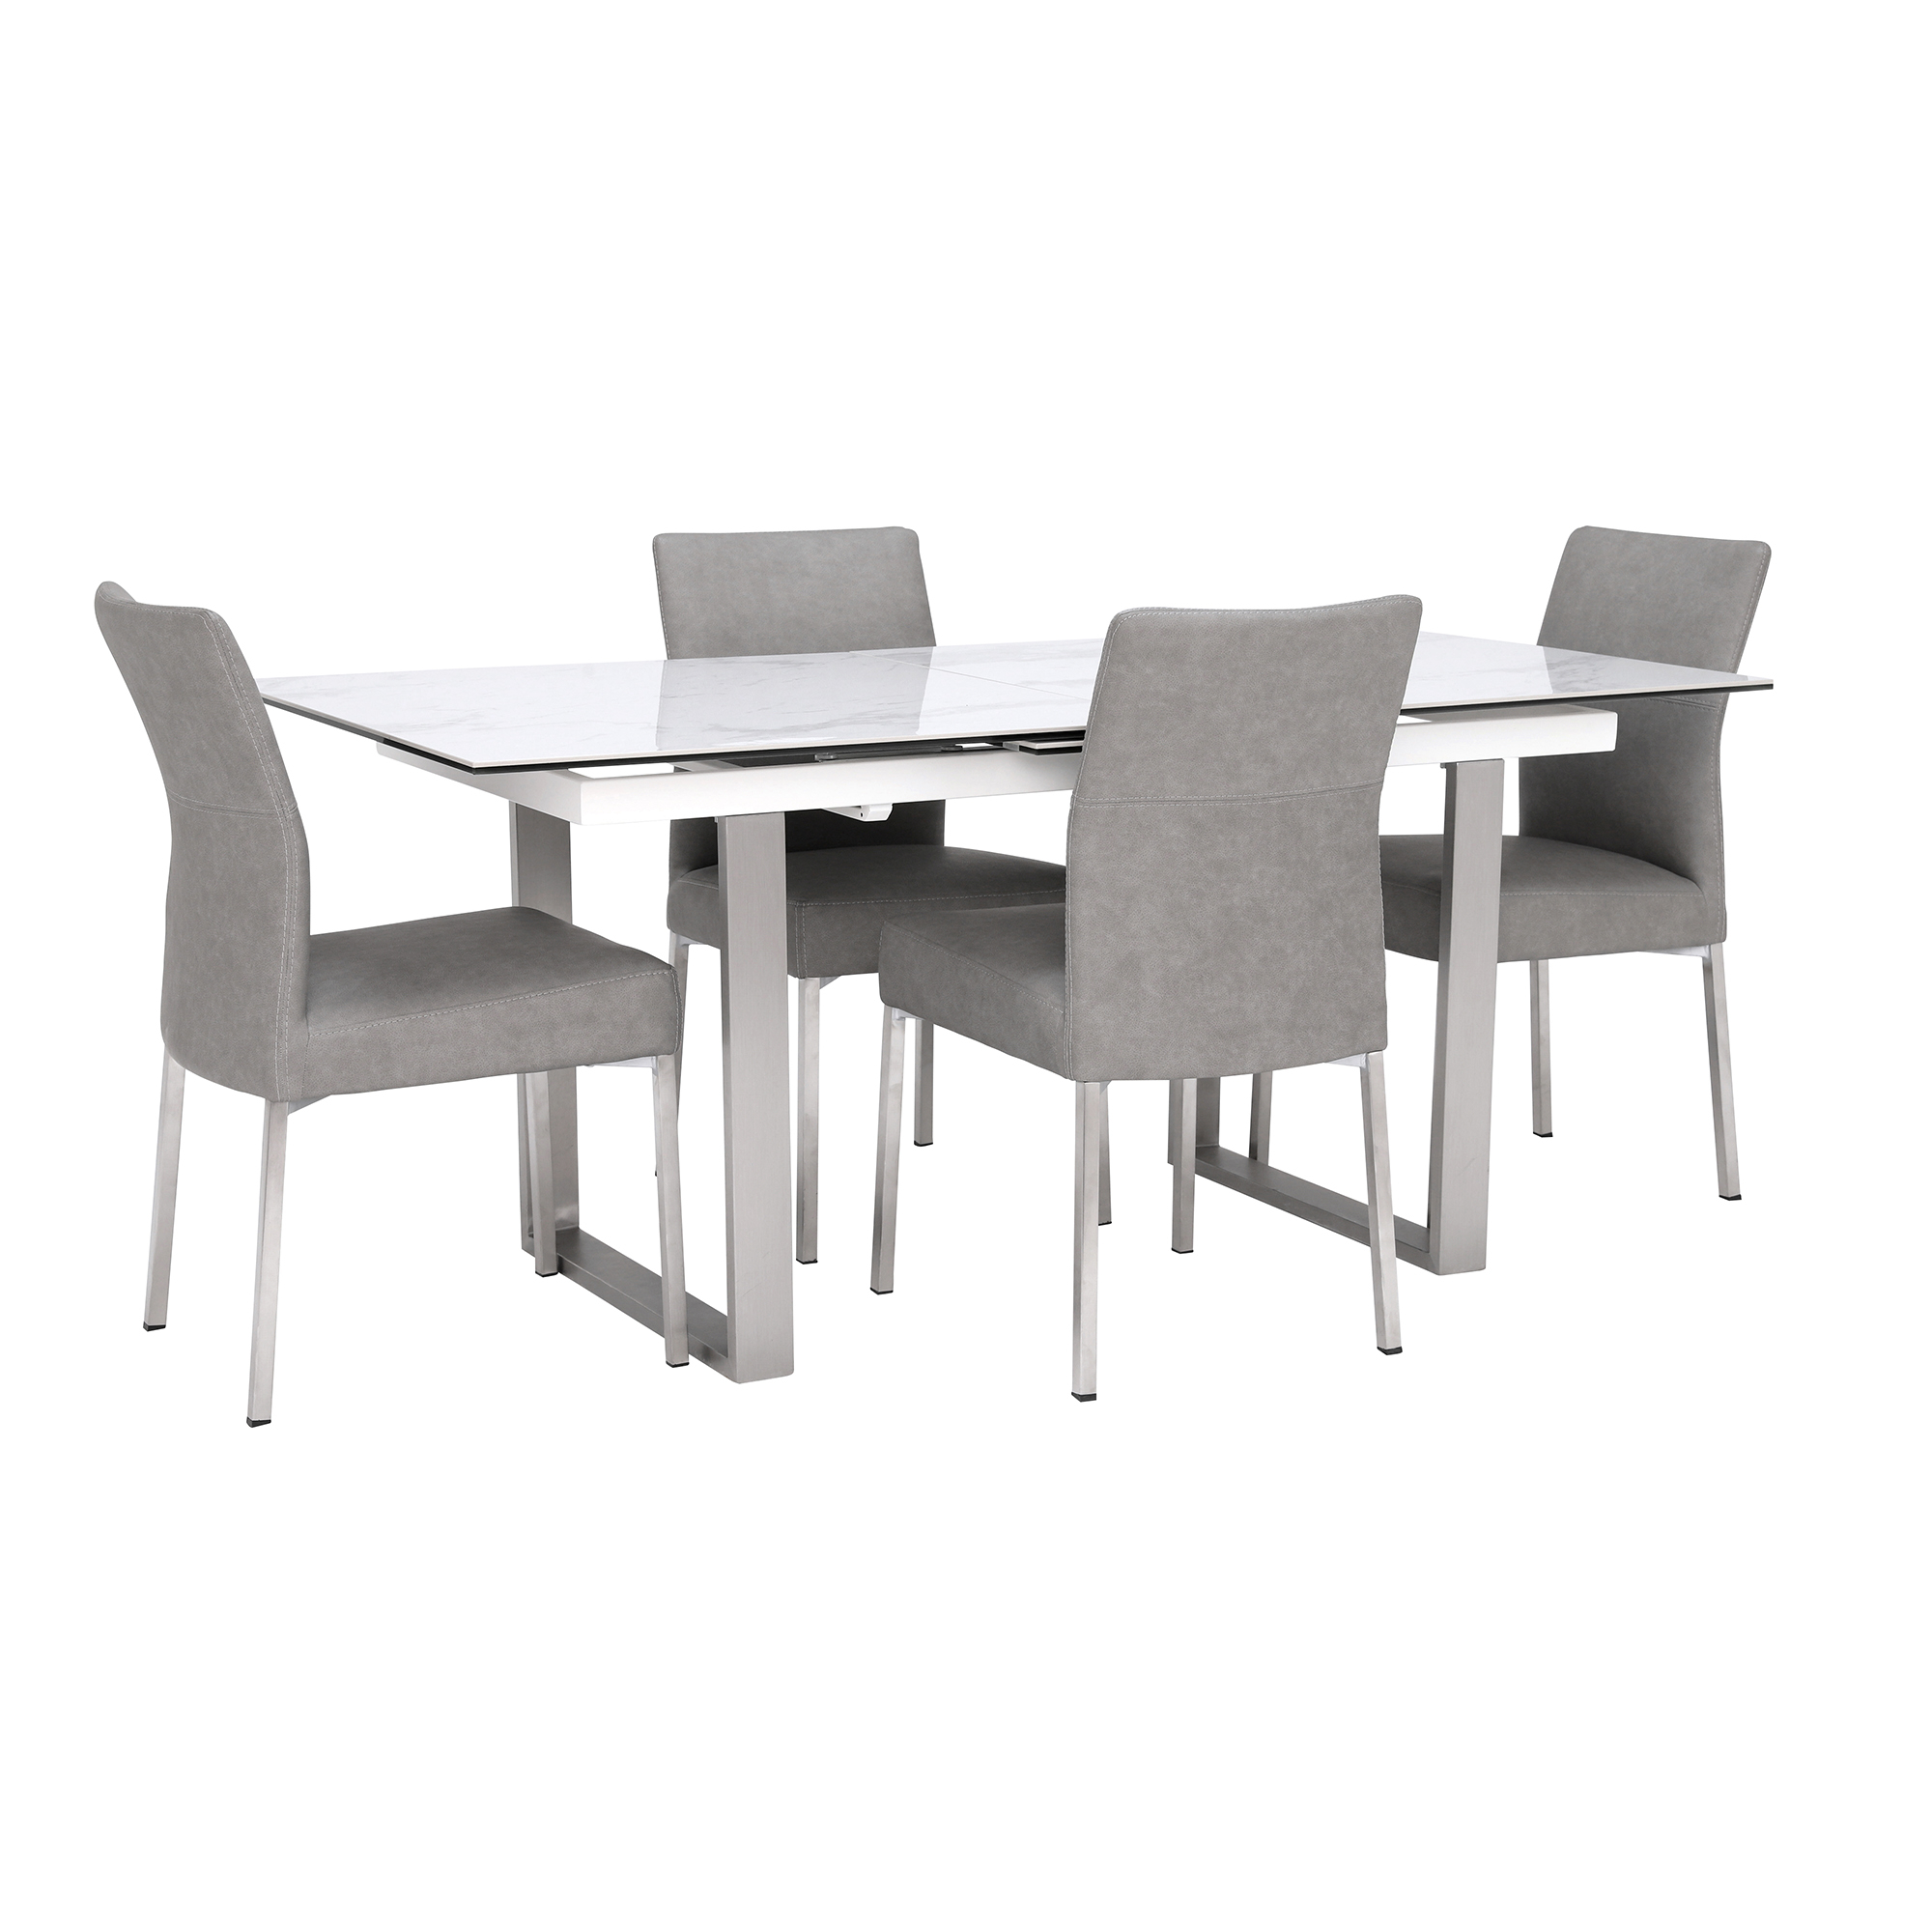 The Range Dining Table And 4 Chairs • Faucet Ideas Site